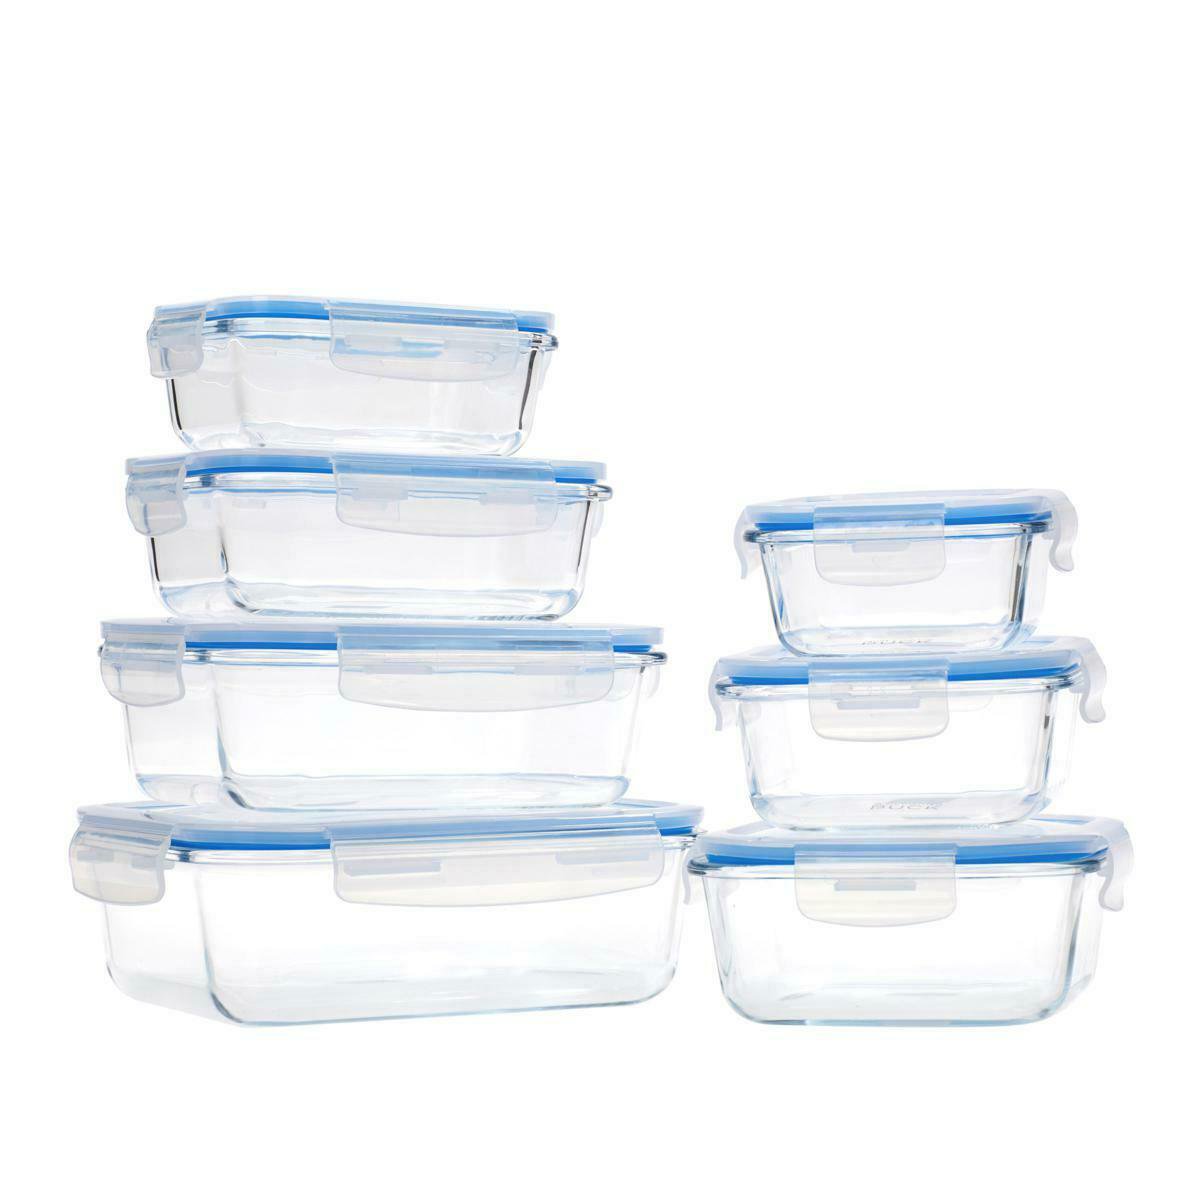 Wolfgang Puck 14-piece Glass Food Storage Containers with Lids